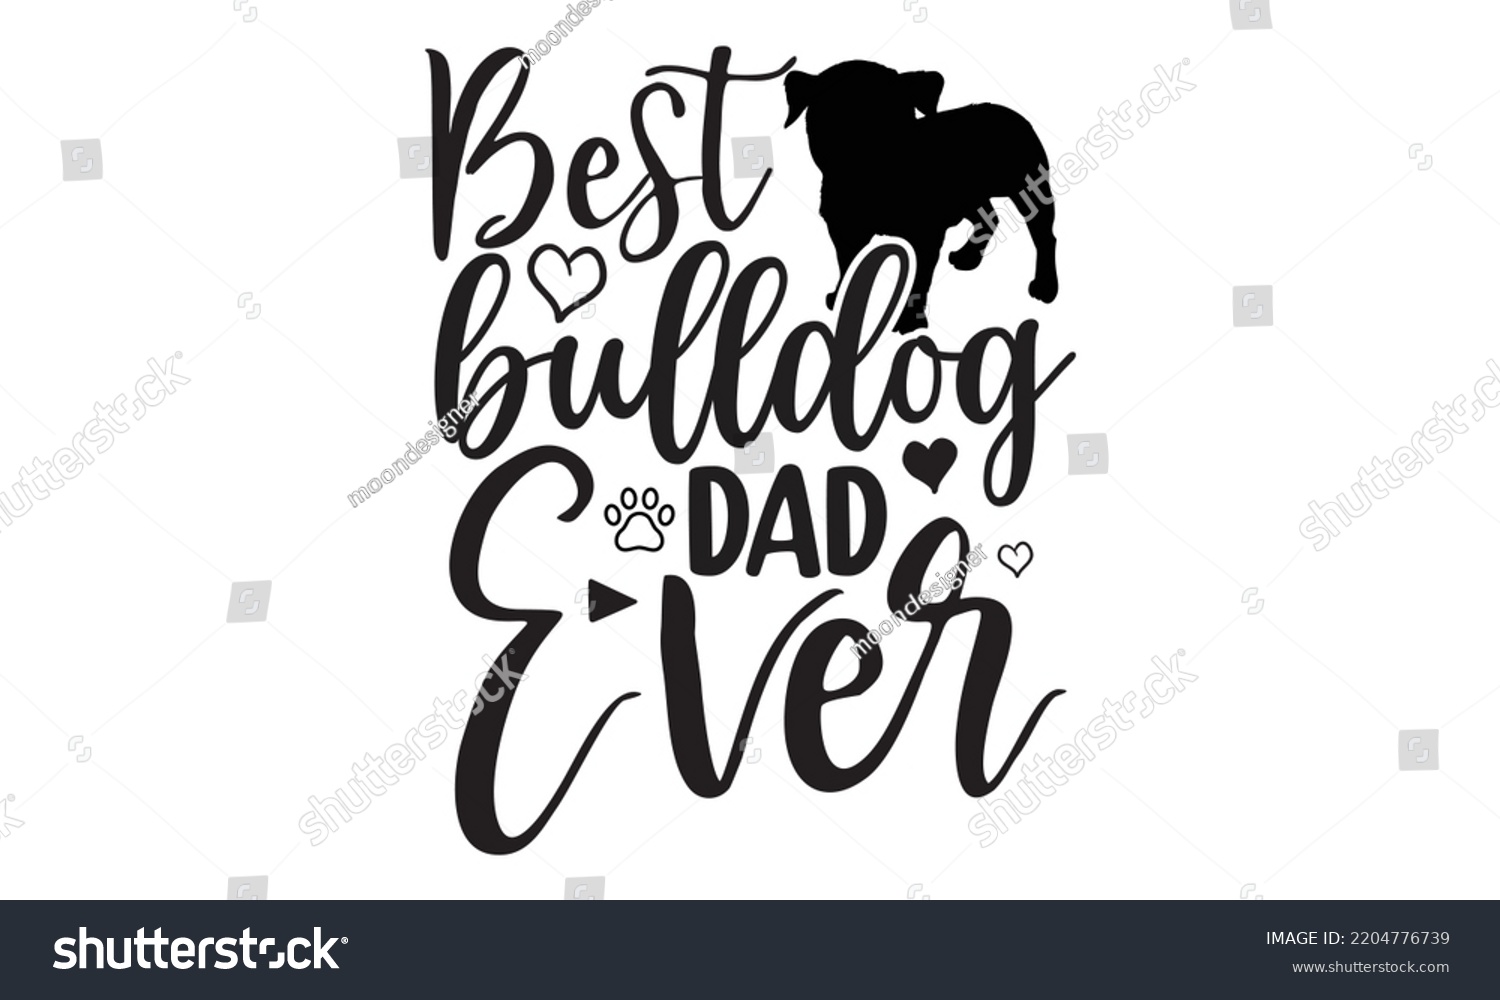 SVG of Best bulldog dad ever - Bullodog T-shirt and SVG Design,  Dog lover t shirt design gift for women, typography design, can you download this Design, svg Files for Cutting and Silhouette EPS, 10 svg